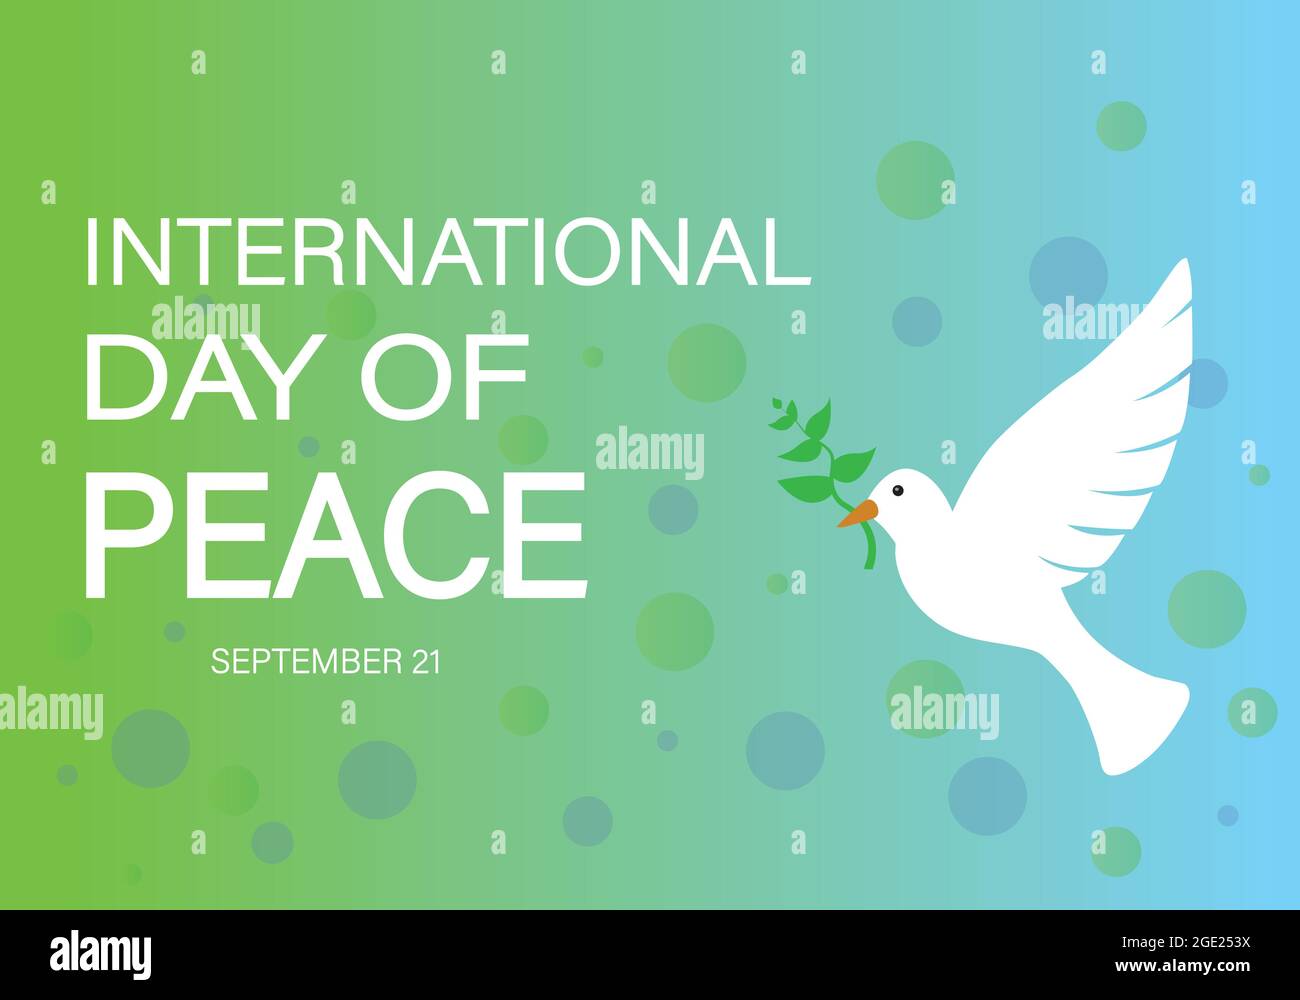 International day of peace banner or poster. Flying dove resembles peace. September 21 Stock Vector